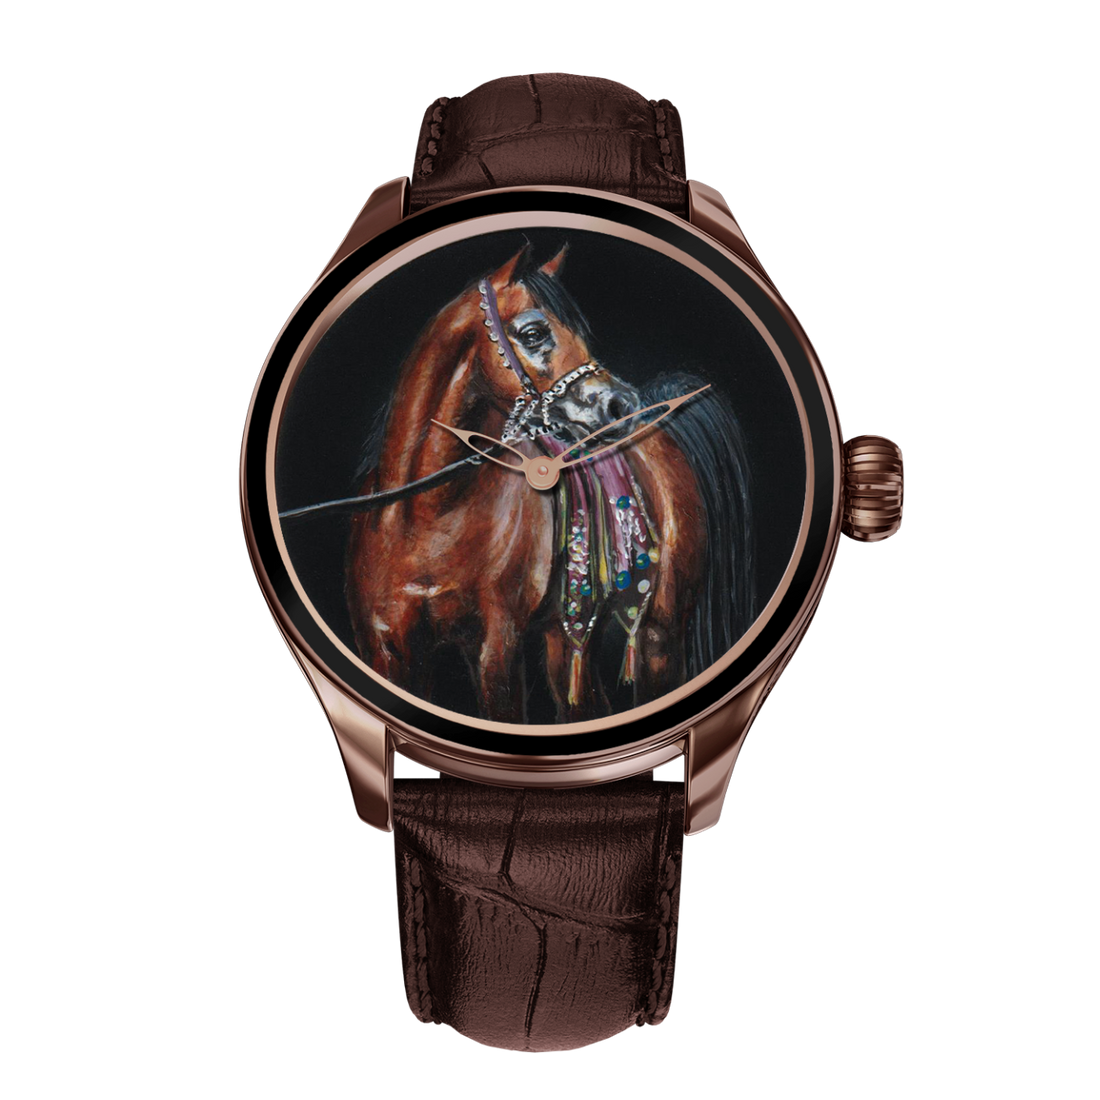 B360-unique-Hand painted-Horse- SR. 5363 (1 out of 1)